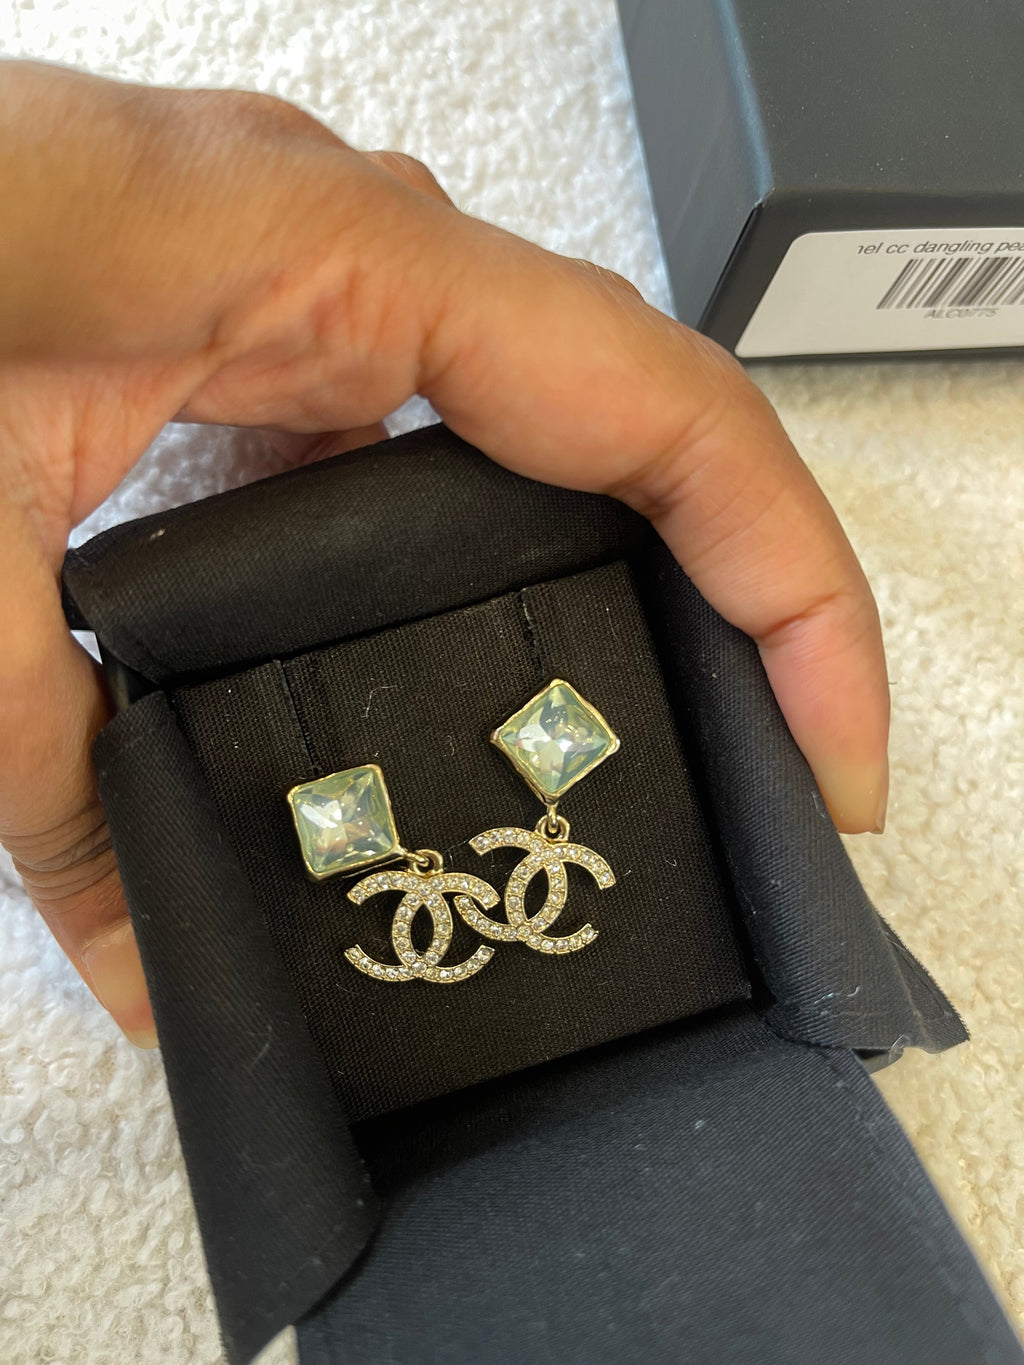 Vintage CHANEL earrings with square and rhombus shape and faux